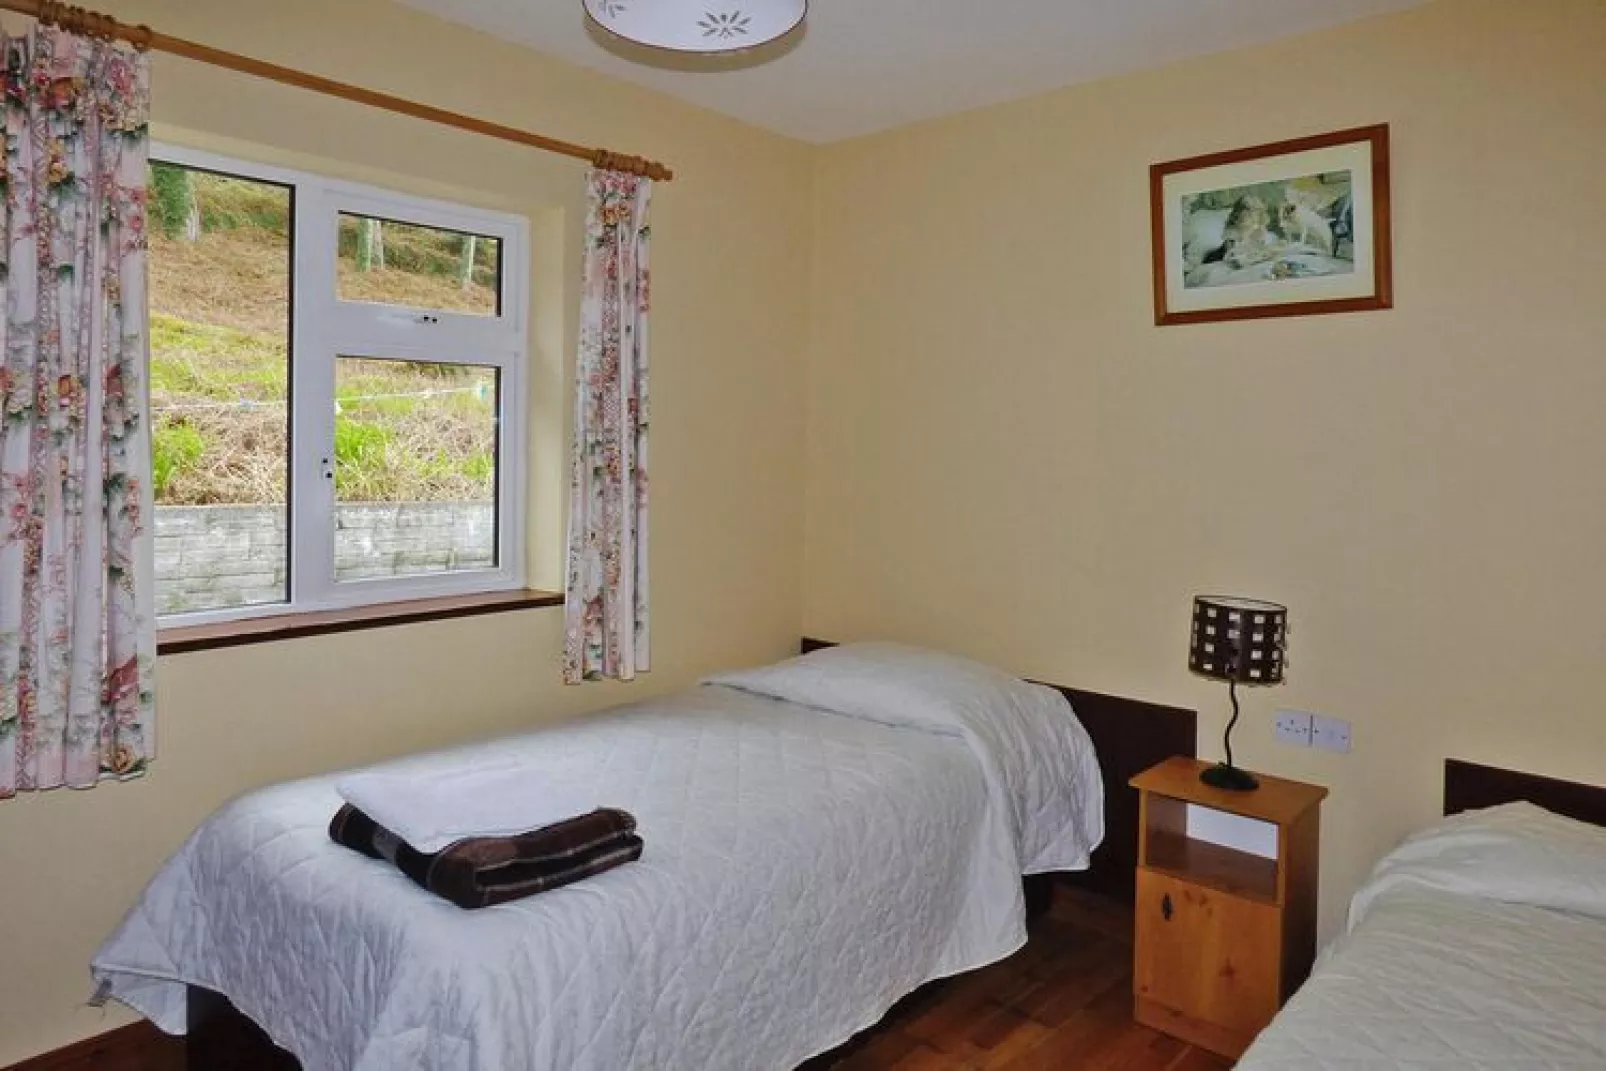 Rossbeigh Beach Holiday Cottages in Glenbeigh Co Kerry-Slaapkamer